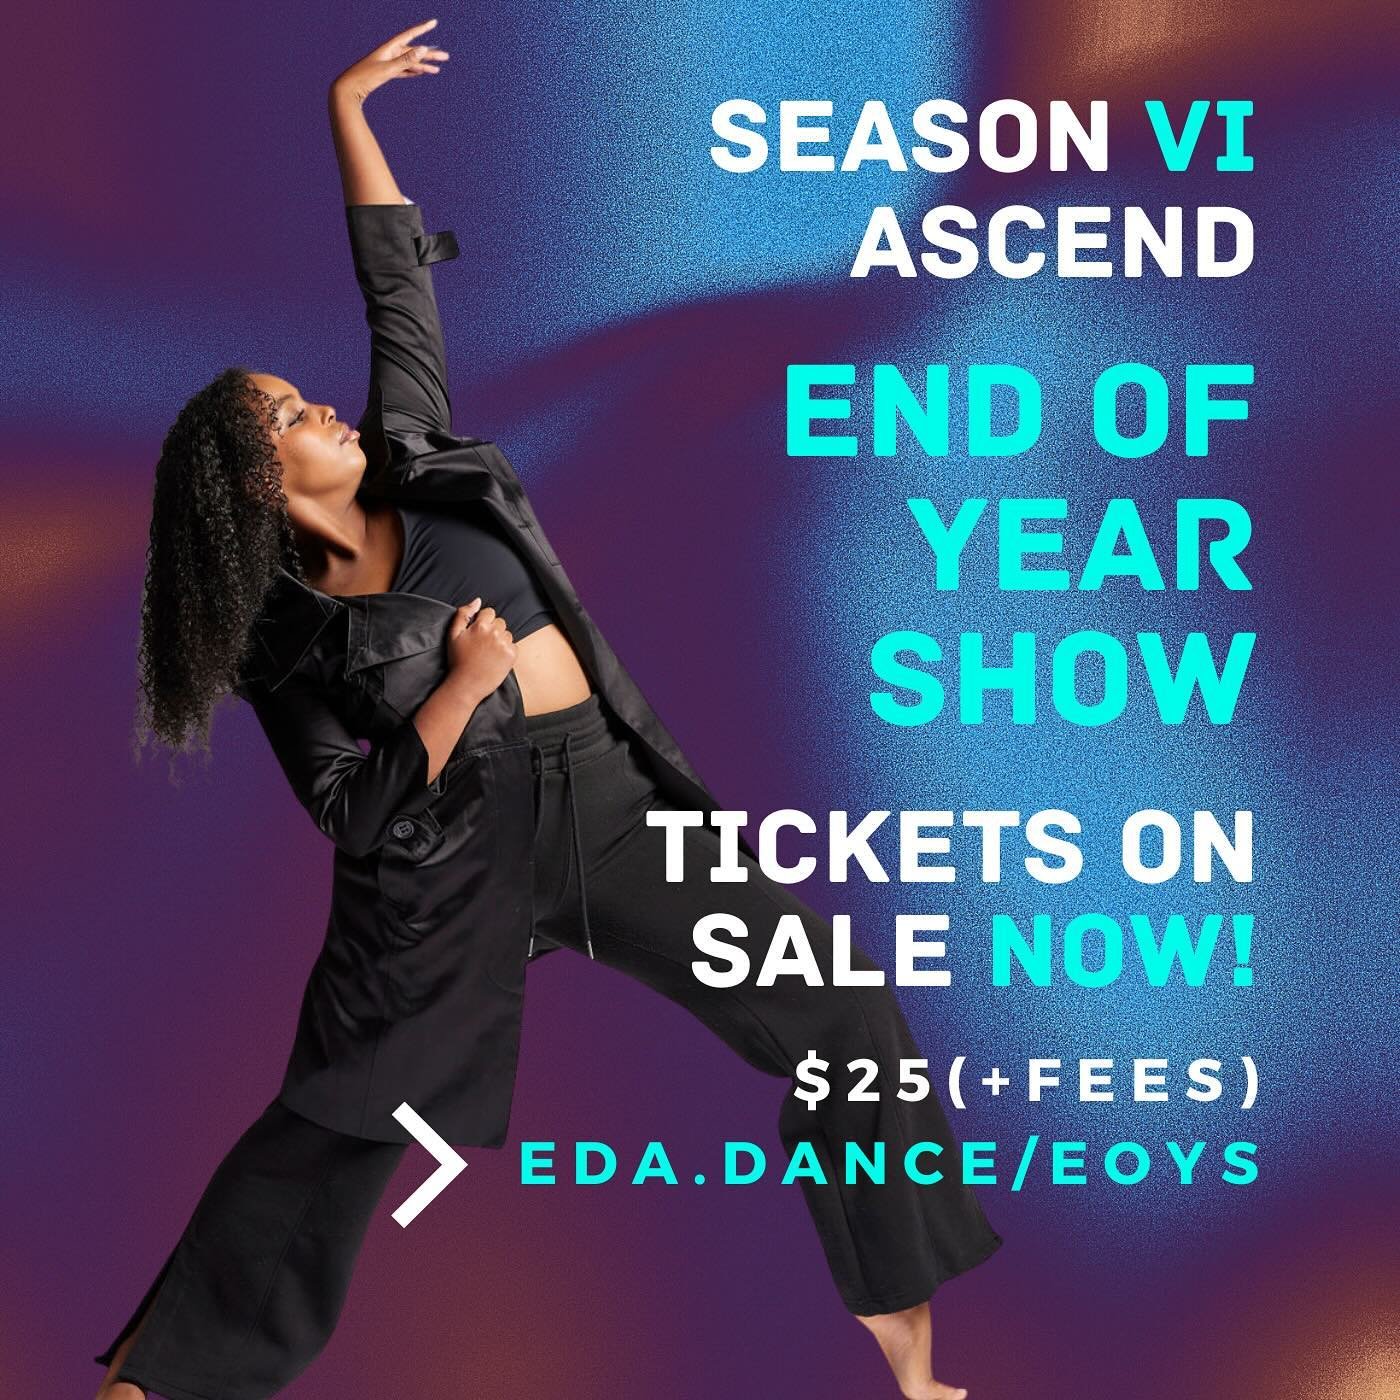 Tickets for our Season VI: Ascend End of Year Show are LIVE! You can find the ticket purchase link on our website at eda.dance/eoys. Grab your seat before it sells out!

#Elevate #ElevateDanceAcademy #Show #DanceShow #EndOfYearShow #Dance #PortlandDa